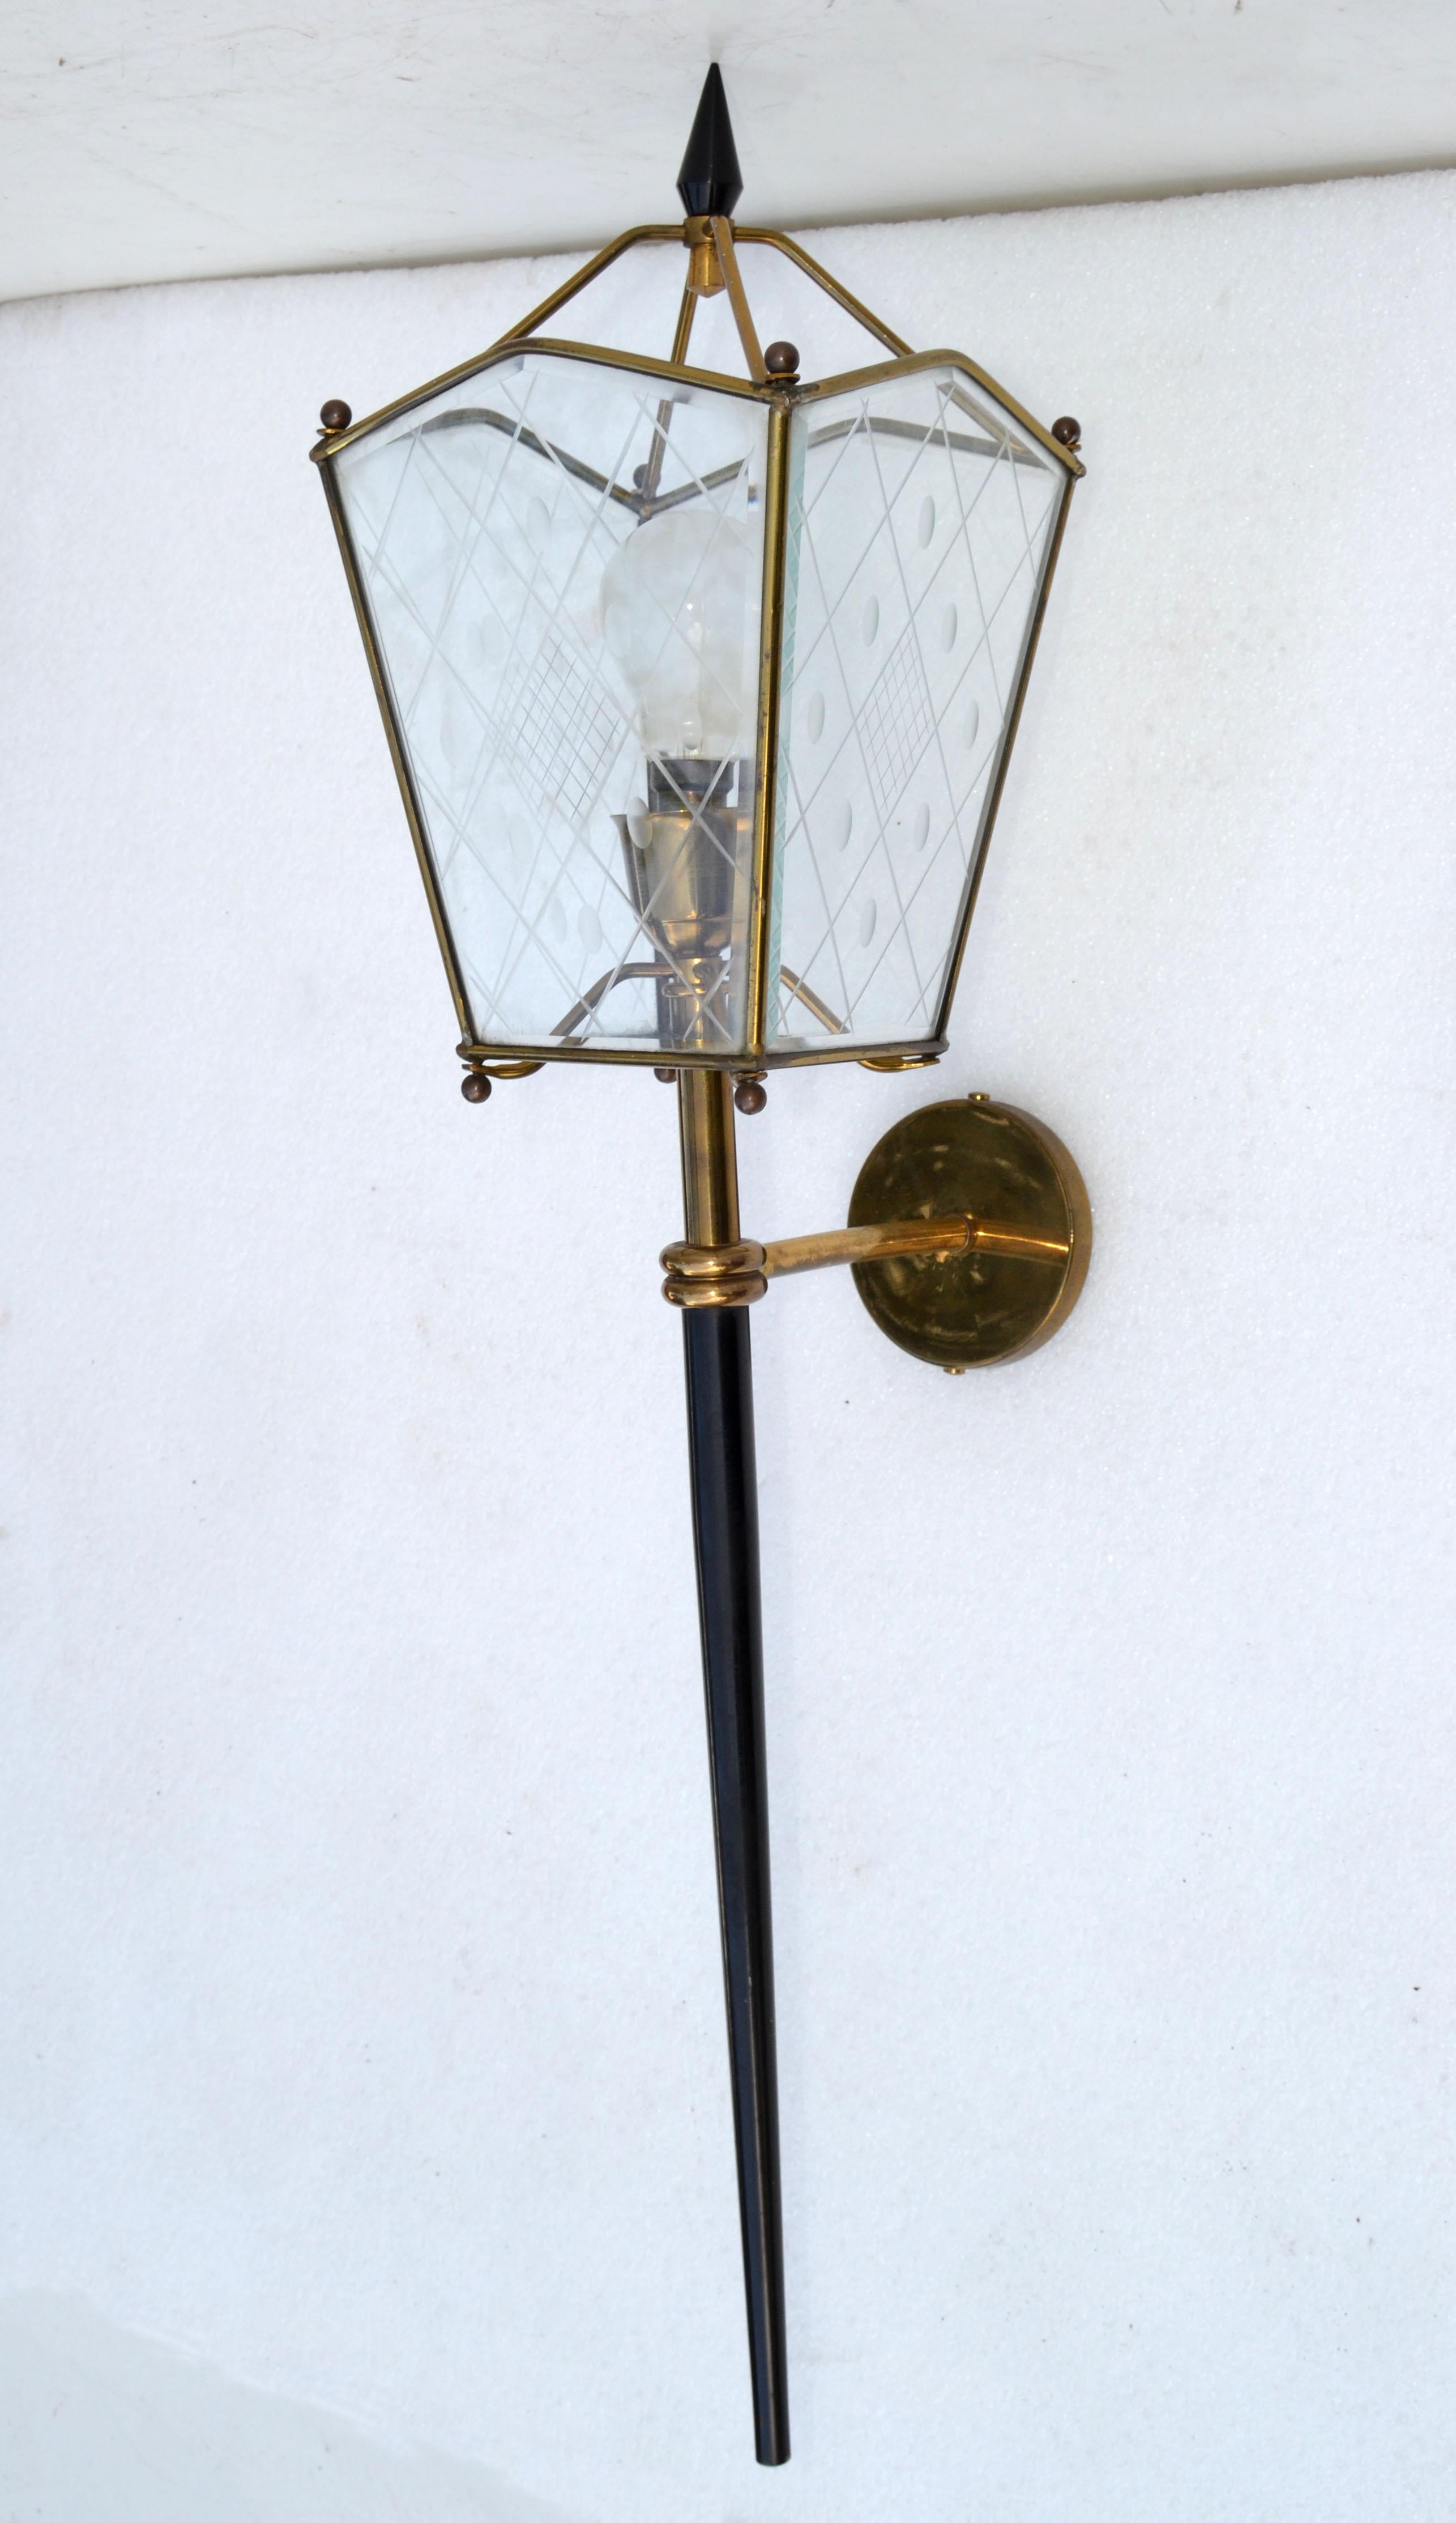 Pair of Jacques Adnet style sconces, wall lights, lantern lamps in brass, etched glass and gun metal, this is the largest size, measures 31 inches height. 
In perfect working condition, Sconce takes 1 light bulb max. 40 watts, or LED